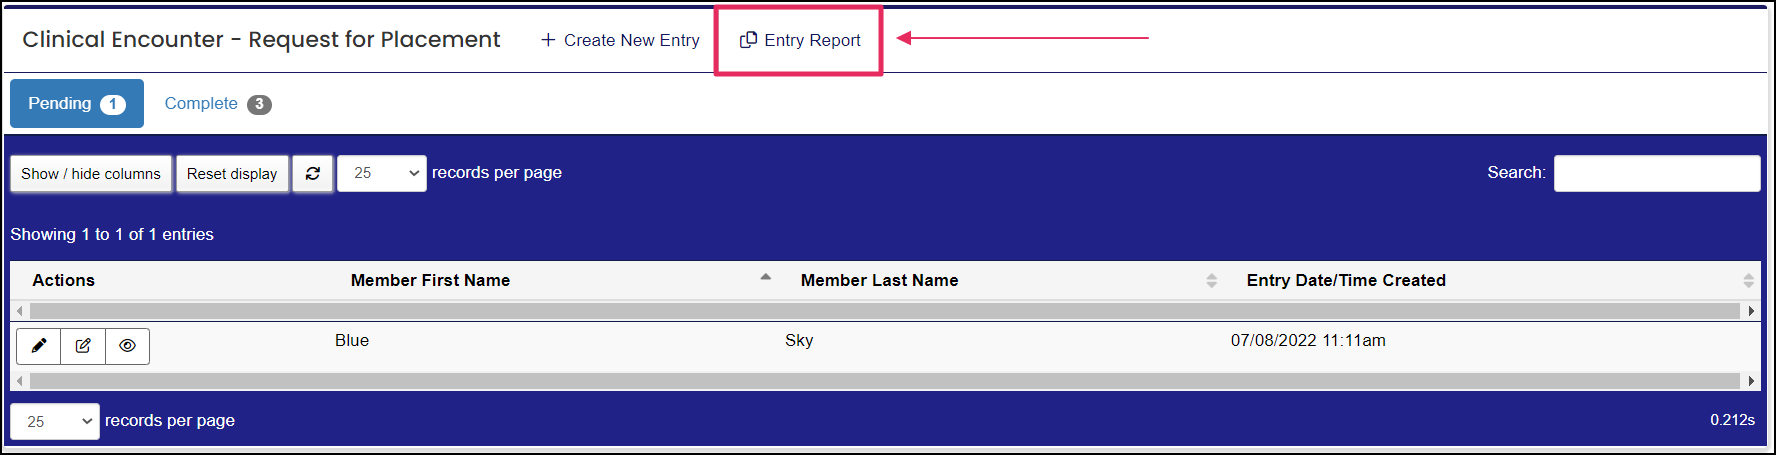 Entries table highlighting the entry report button